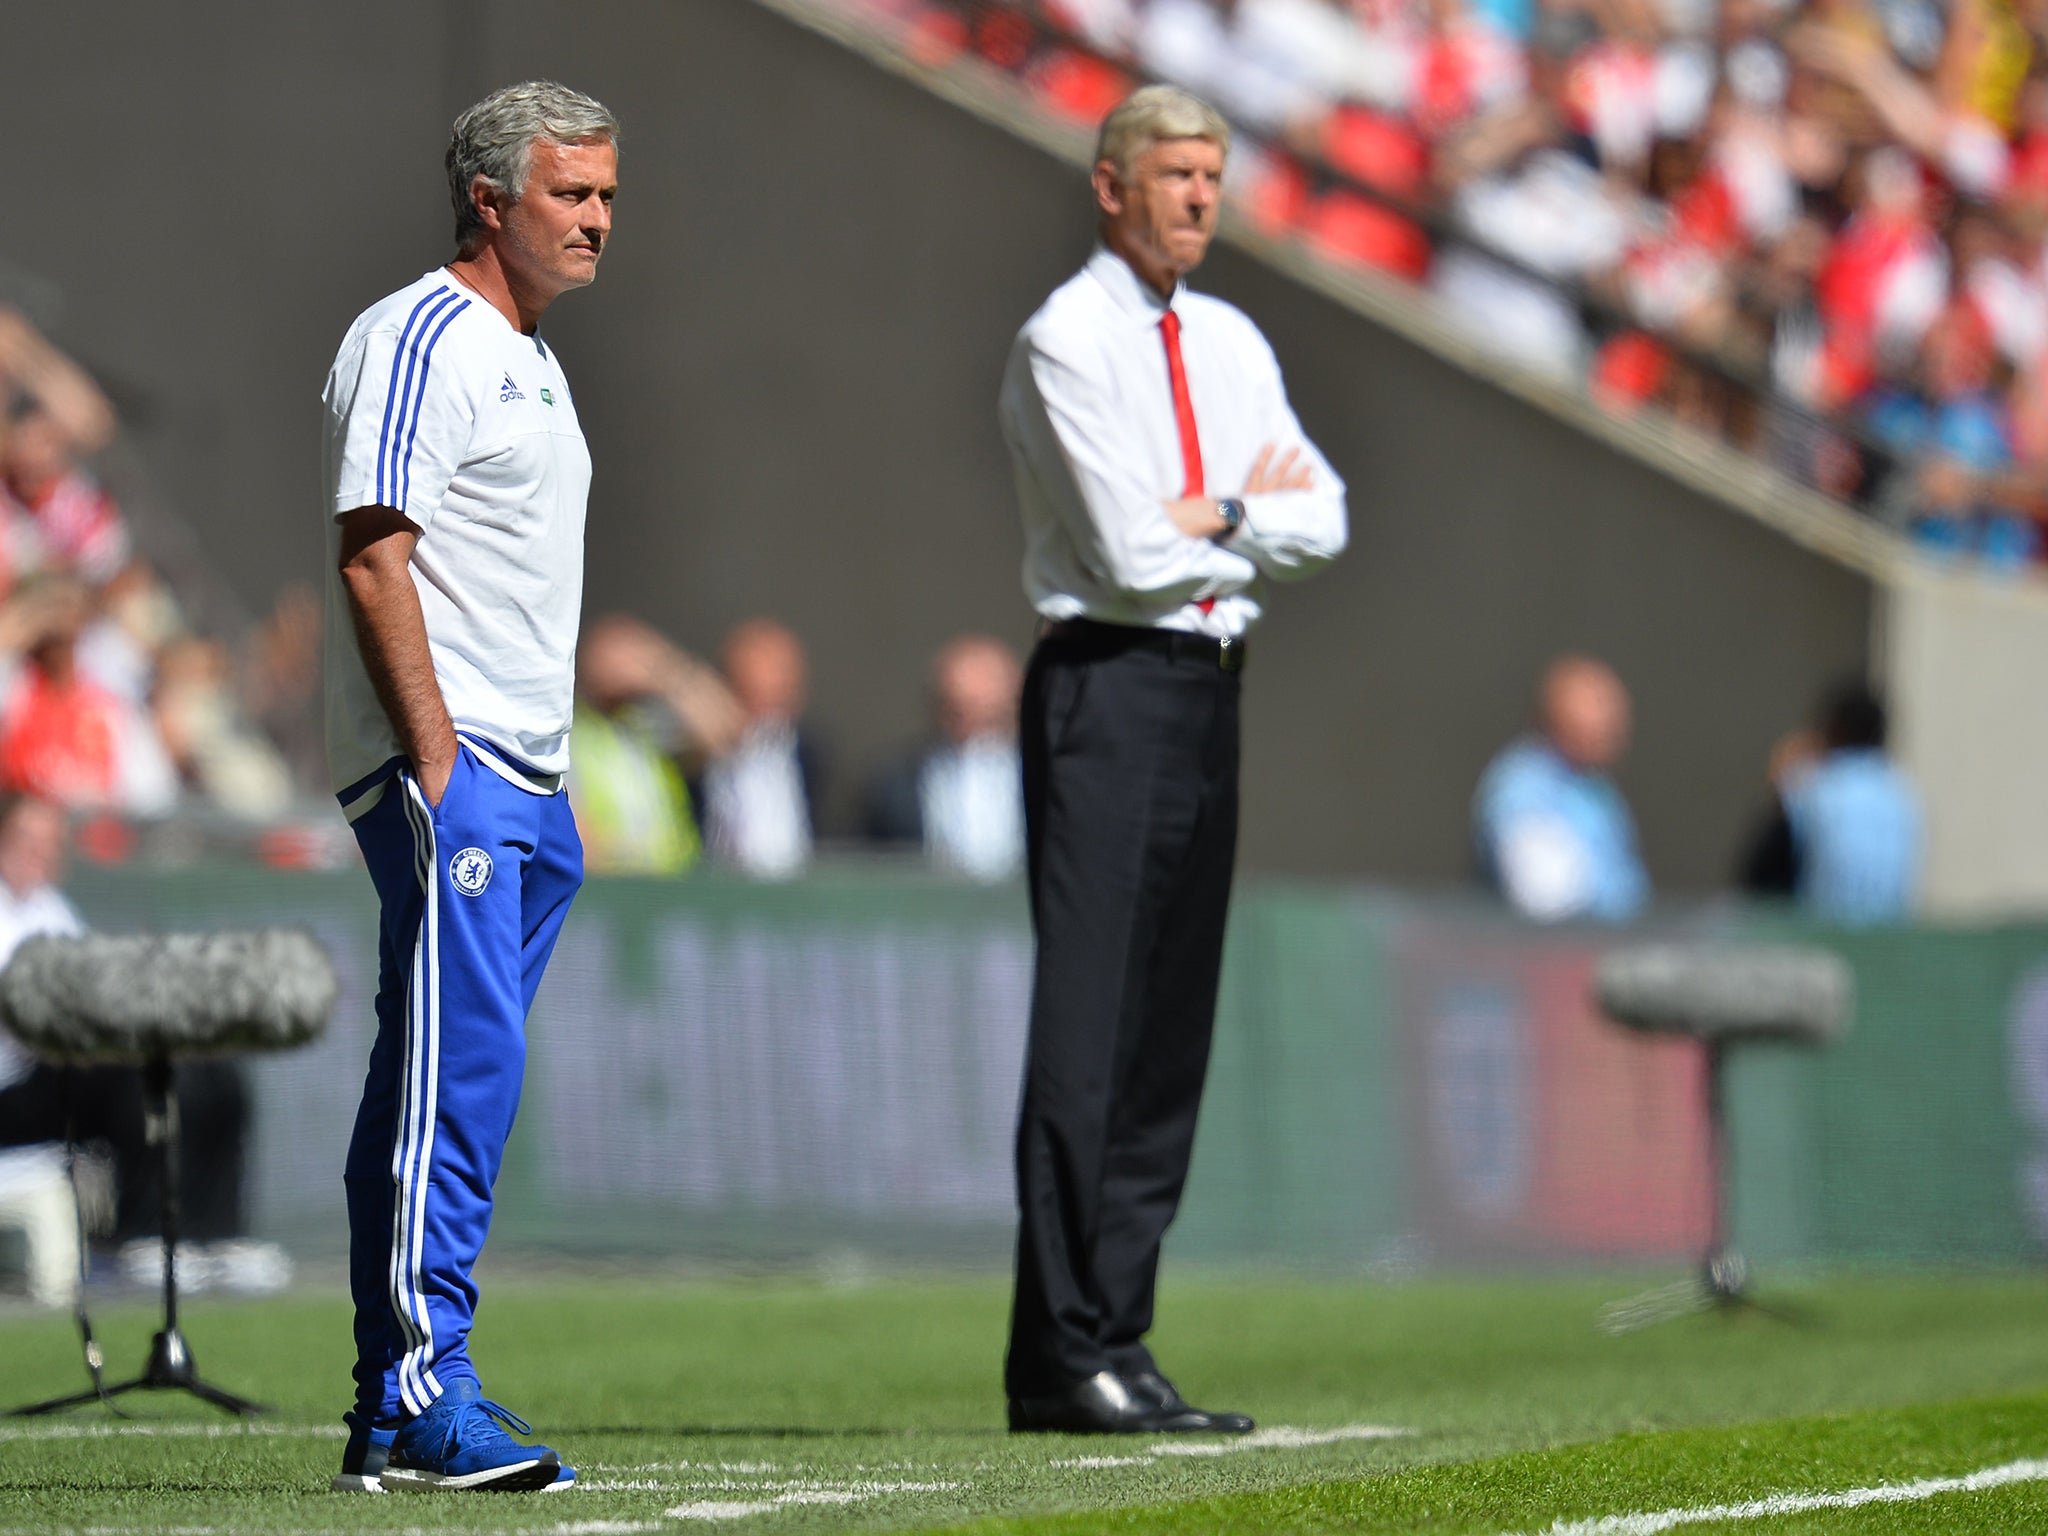 Mourinho and Wenger on the touchline